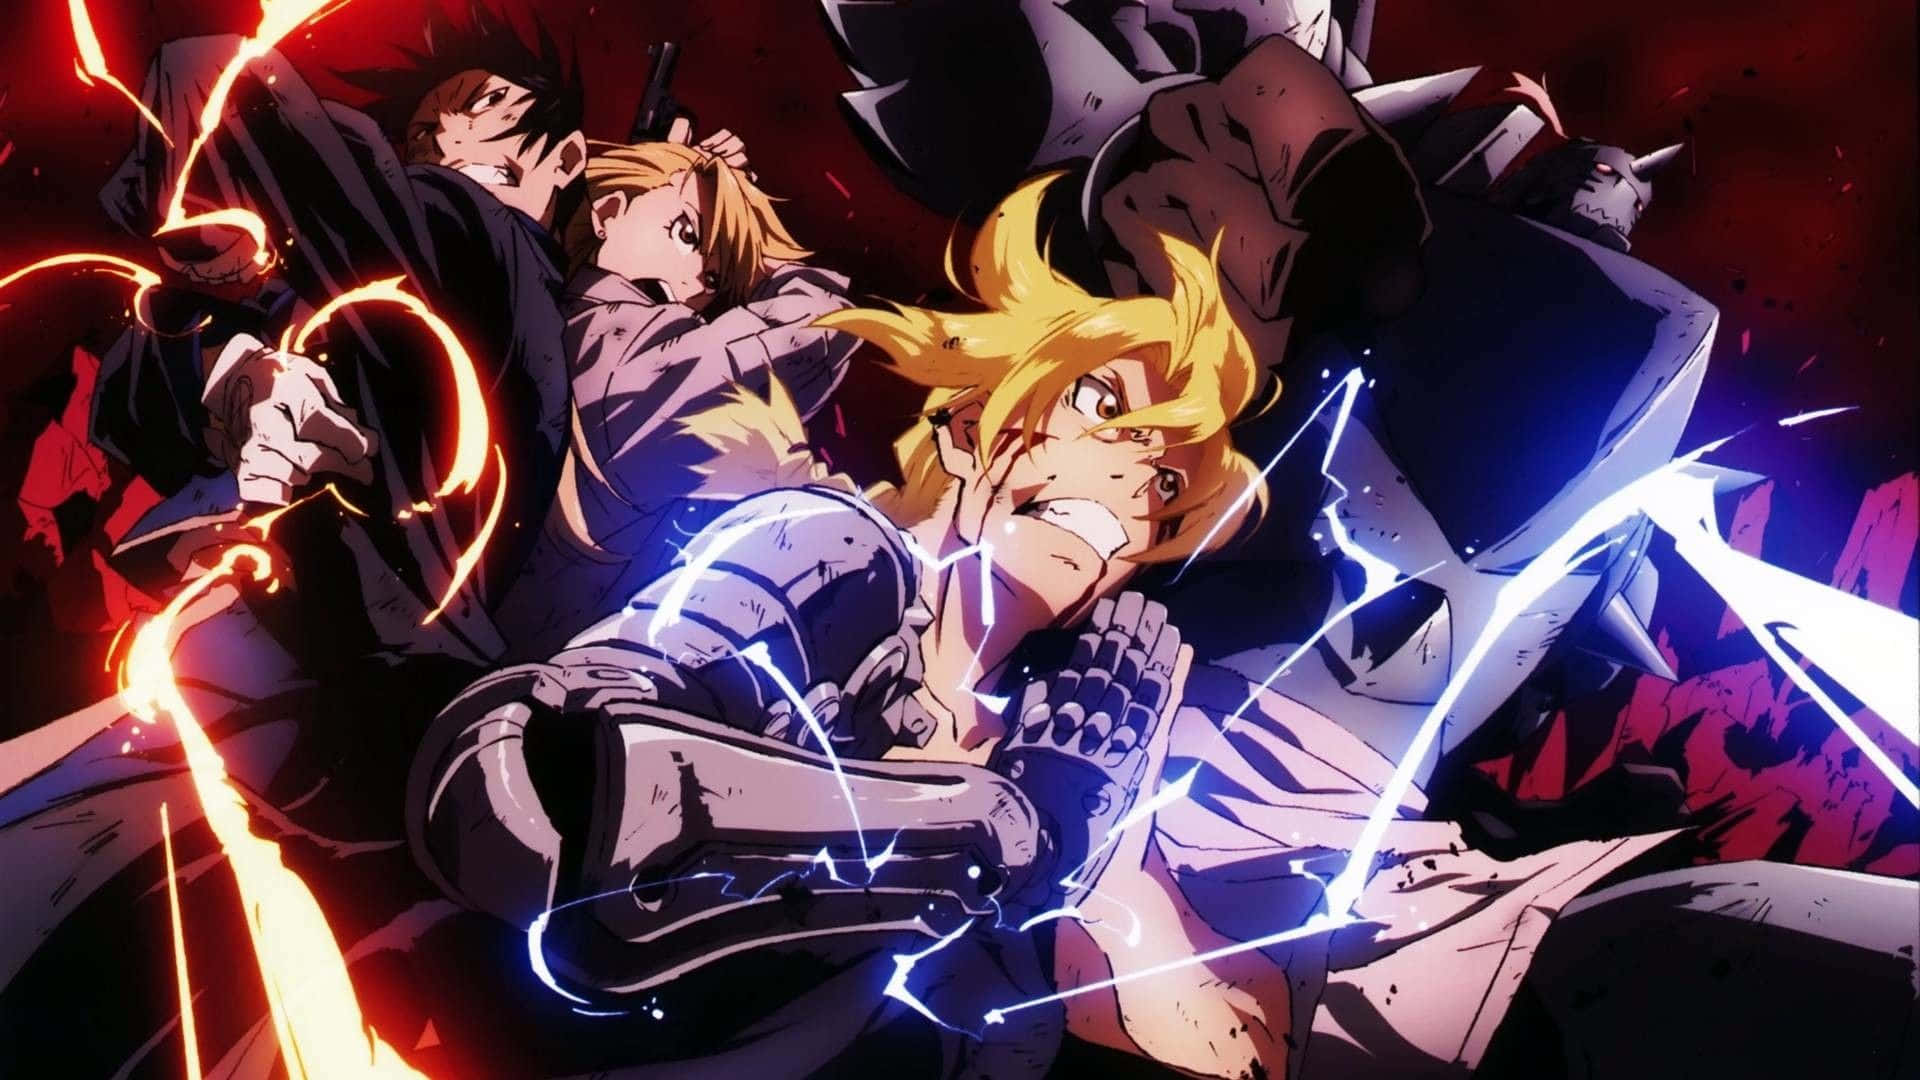 The Elric Brothers Lead the Fight Against the Homunculi